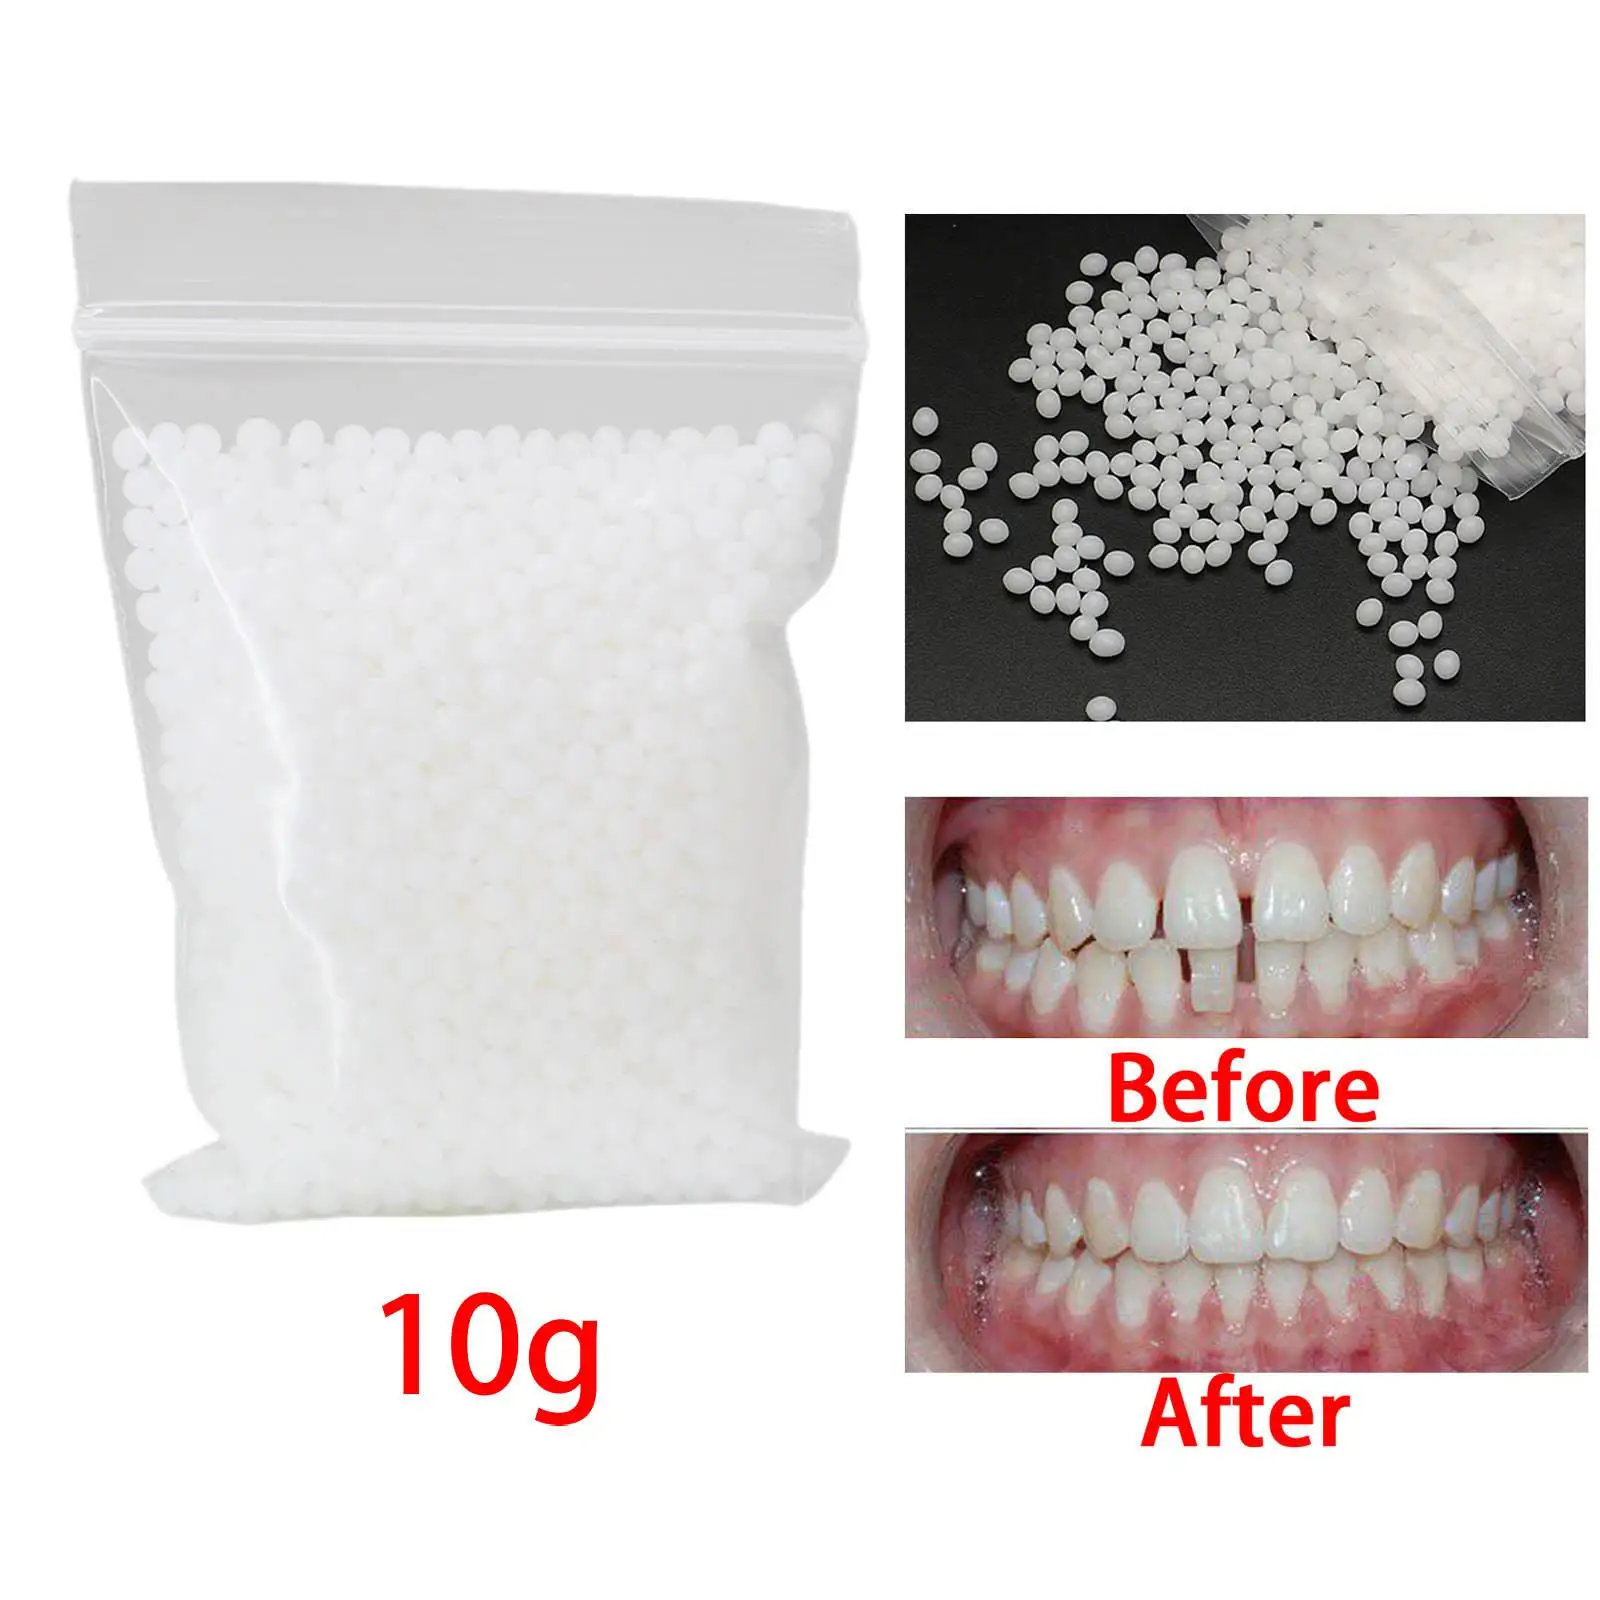 50g/100g Temporary Tooth Repair kit for Fix Filling the Missing Broken  Tooth and Gaps, Moldable Fake Teeth Veneers and Thermal Beads Replacement  Kit, Artificial Teeth 